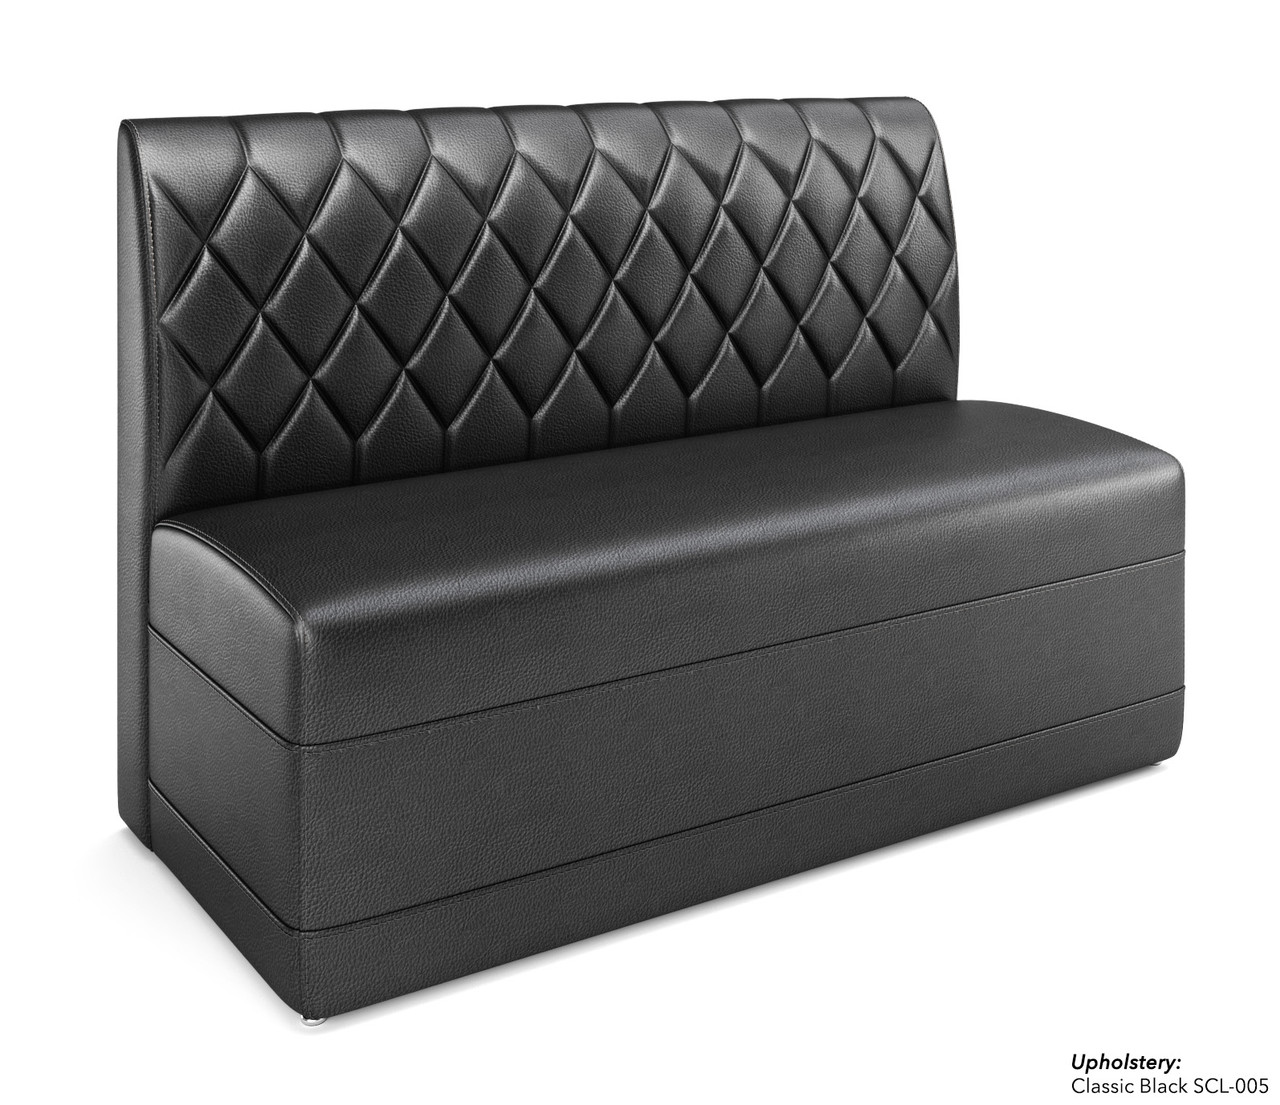 Buy FR Restaurant Booths Series Diamond Tufted Single Back Upholstered Booth  Online - Booths & Benches - Restaurant Furniture - Commercial Seating -  FurnitureRoots Product